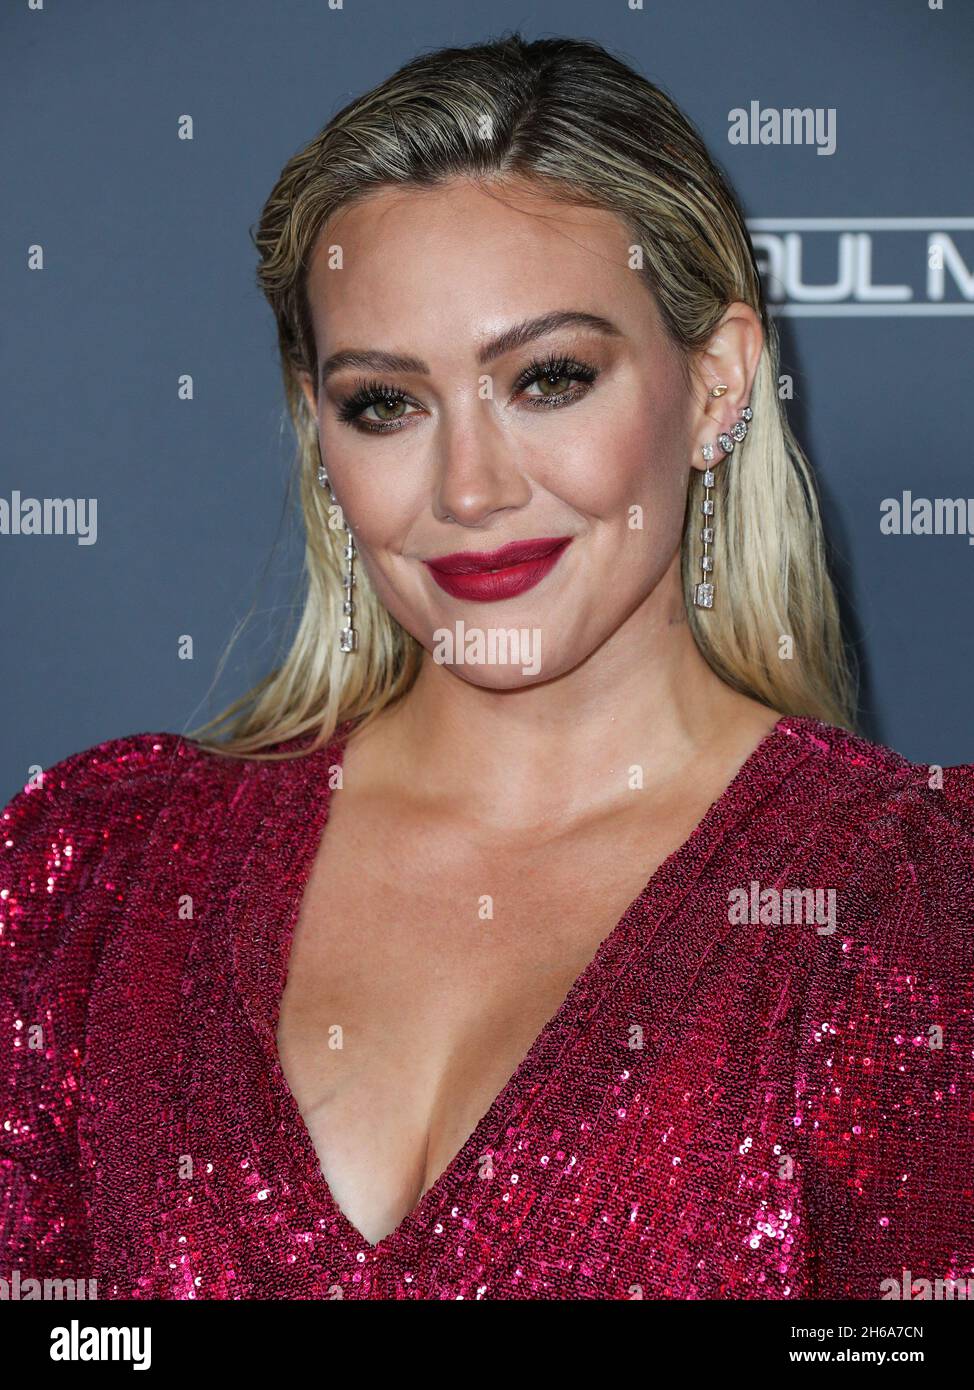 WEST HOLLYWOOD, LOS ANGELES, CALIFORNIA, USA - NOVEMBER 13: Actress Hilary Duff wearing an Osman dress and Rahamoniv jewelry while wearing shoes and carrying a clutch by Jimmy Choo arrives at the Baby2Baby 10-Year Gala 2021 held at the Pacific Design Center on November 13, 2021 in West Hollywood, Los Angeles, California, United States. (Photo by Xavier Collin/Image Press Agency/Sipa USA) Stock Photo